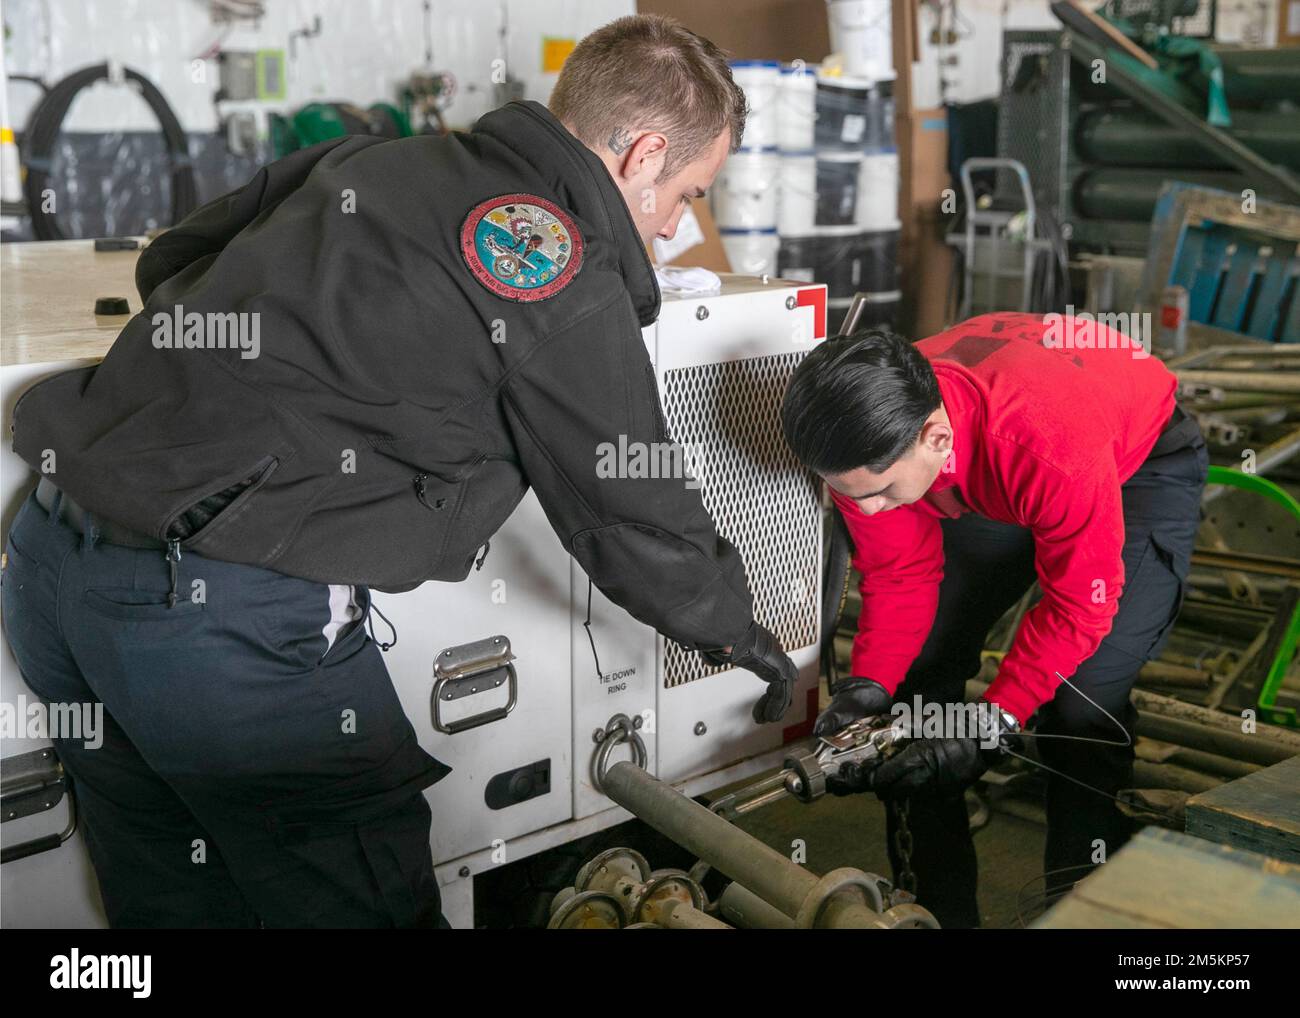 Aviation Ordnanceman Airman Robert Parsons, left, from Aurora, Colorado, and Aviation Ordnanceman Airman Andres Perez, from Fontana, California, both assigned to the 'Black Lions' of Strike Fighter Squadron (VFA) 213, secure a hydraulic servicing unit in USS Gerald R. Ford’s (CVN 78) hangar bay, March 23, 2022. Ford is underway in the Atlantic Ocean conducting flight deck certification and air wing carrier qualifications as part of the ship's tailored basic phase prior to operational deployment. Stock Photo